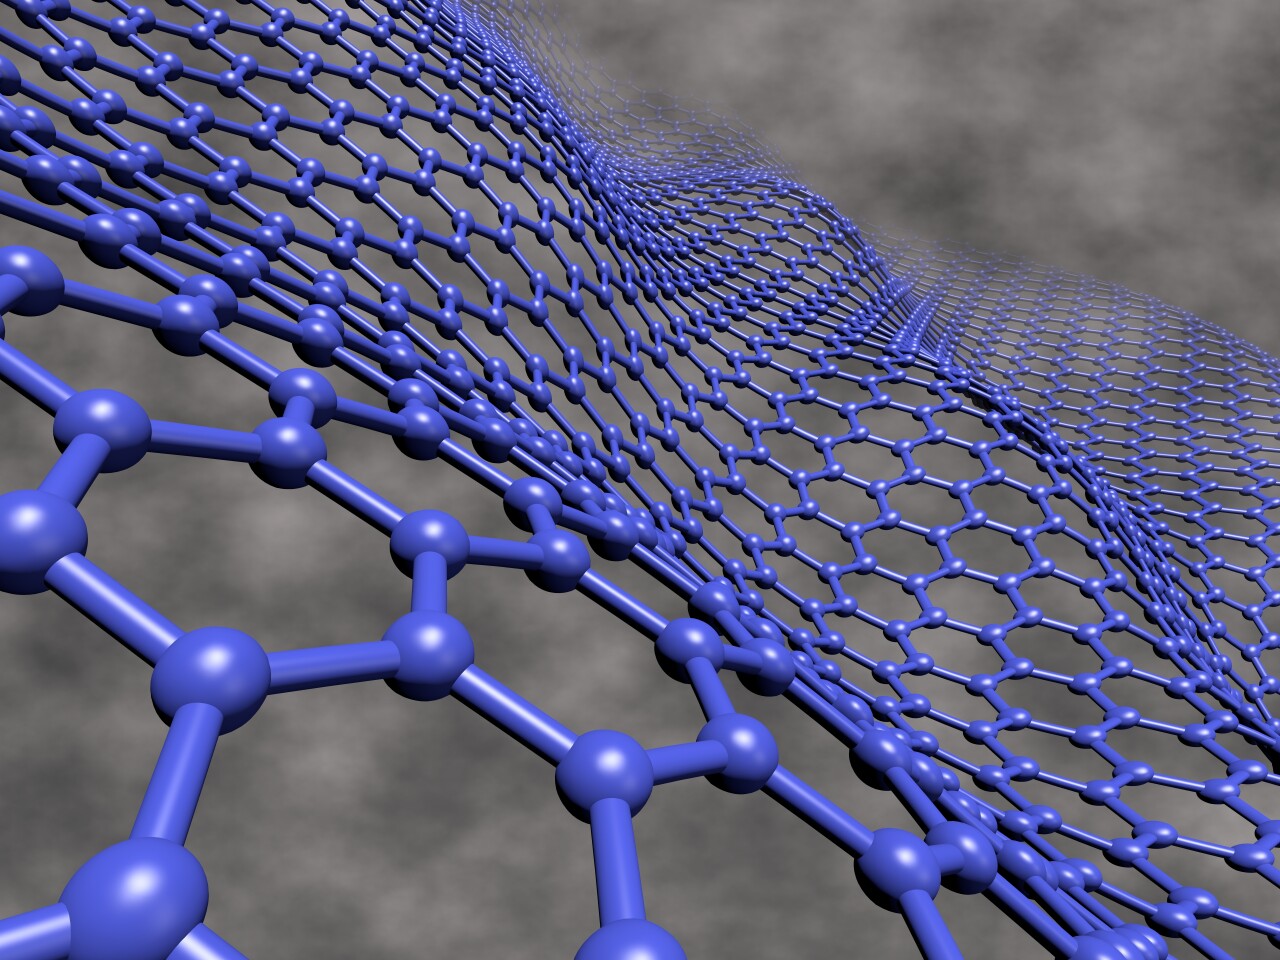 Flexible, Transparent Graphene And Silver Electrodes Have Many Potential Uses